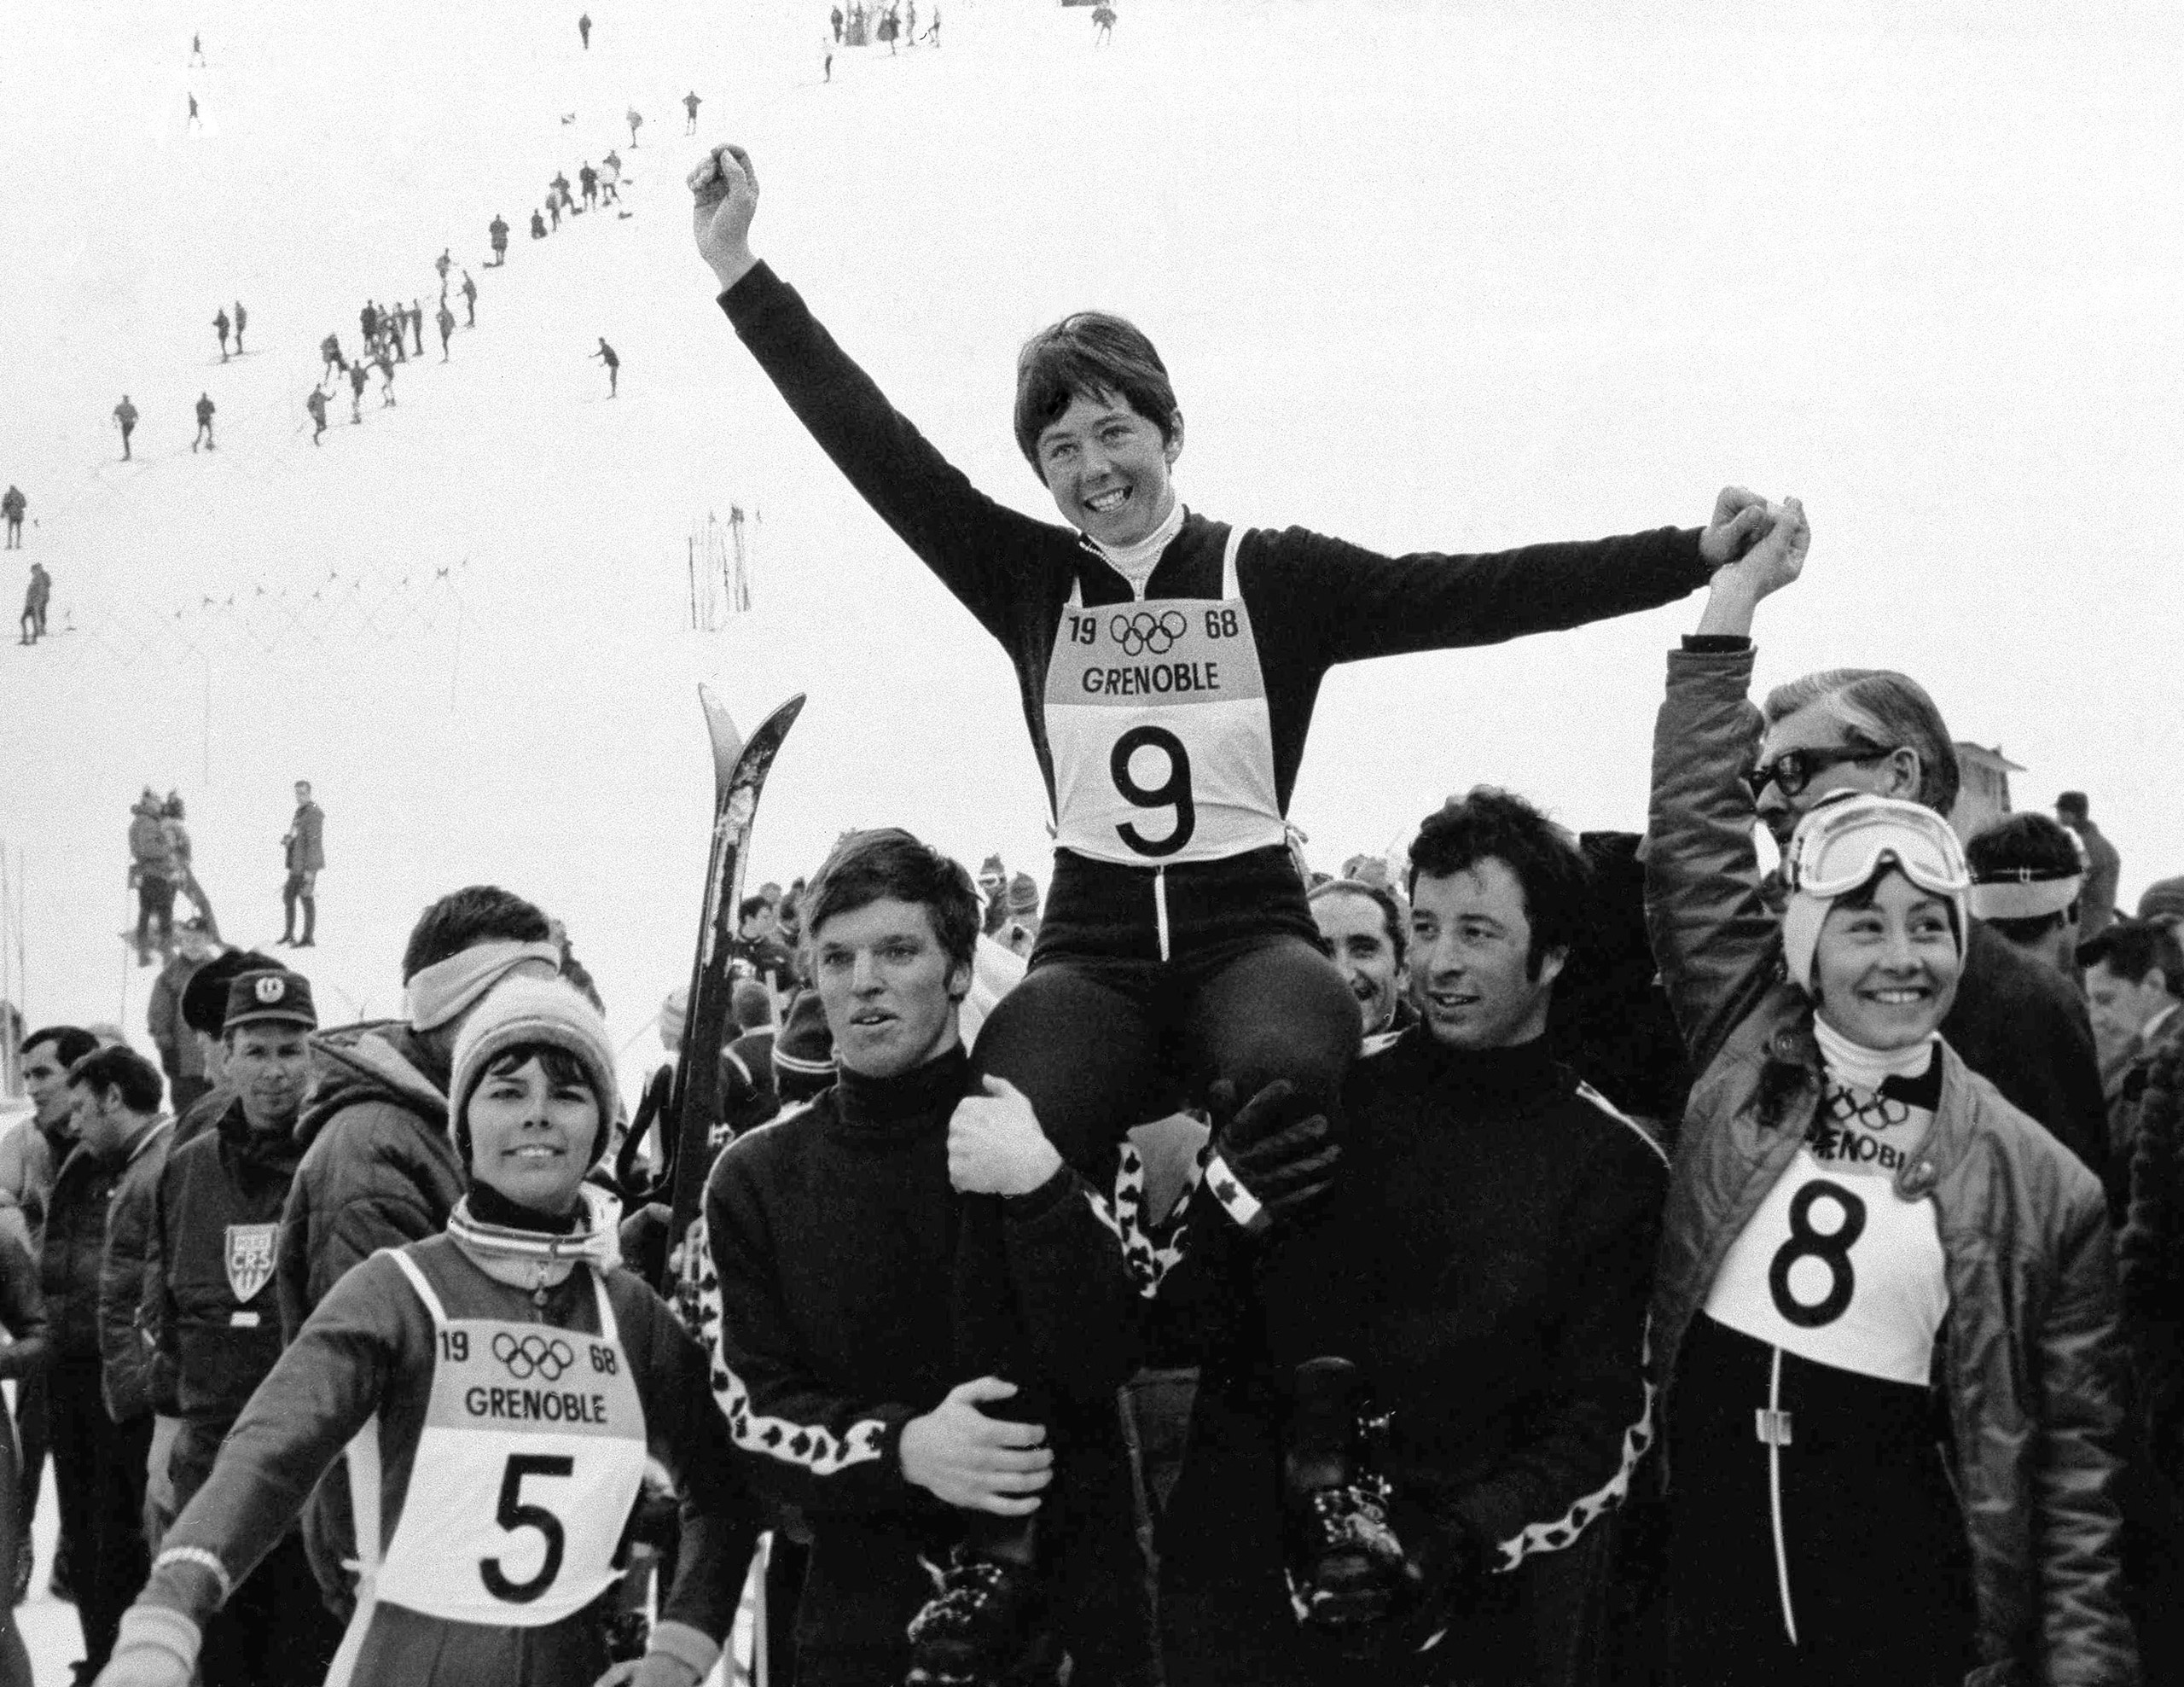 Olympic Giant Slalom skier Nancy Greene of Canada in Chamrousse, France, on Feb. 15, 1968, after she won the gold medal in the event at the Winter Olympics. The year before, she had become the first woman to win the World Cup of Alpine Skiing. TIME noted that year that she  uses her muscles on skis, and she does it better than any other woman in the world.